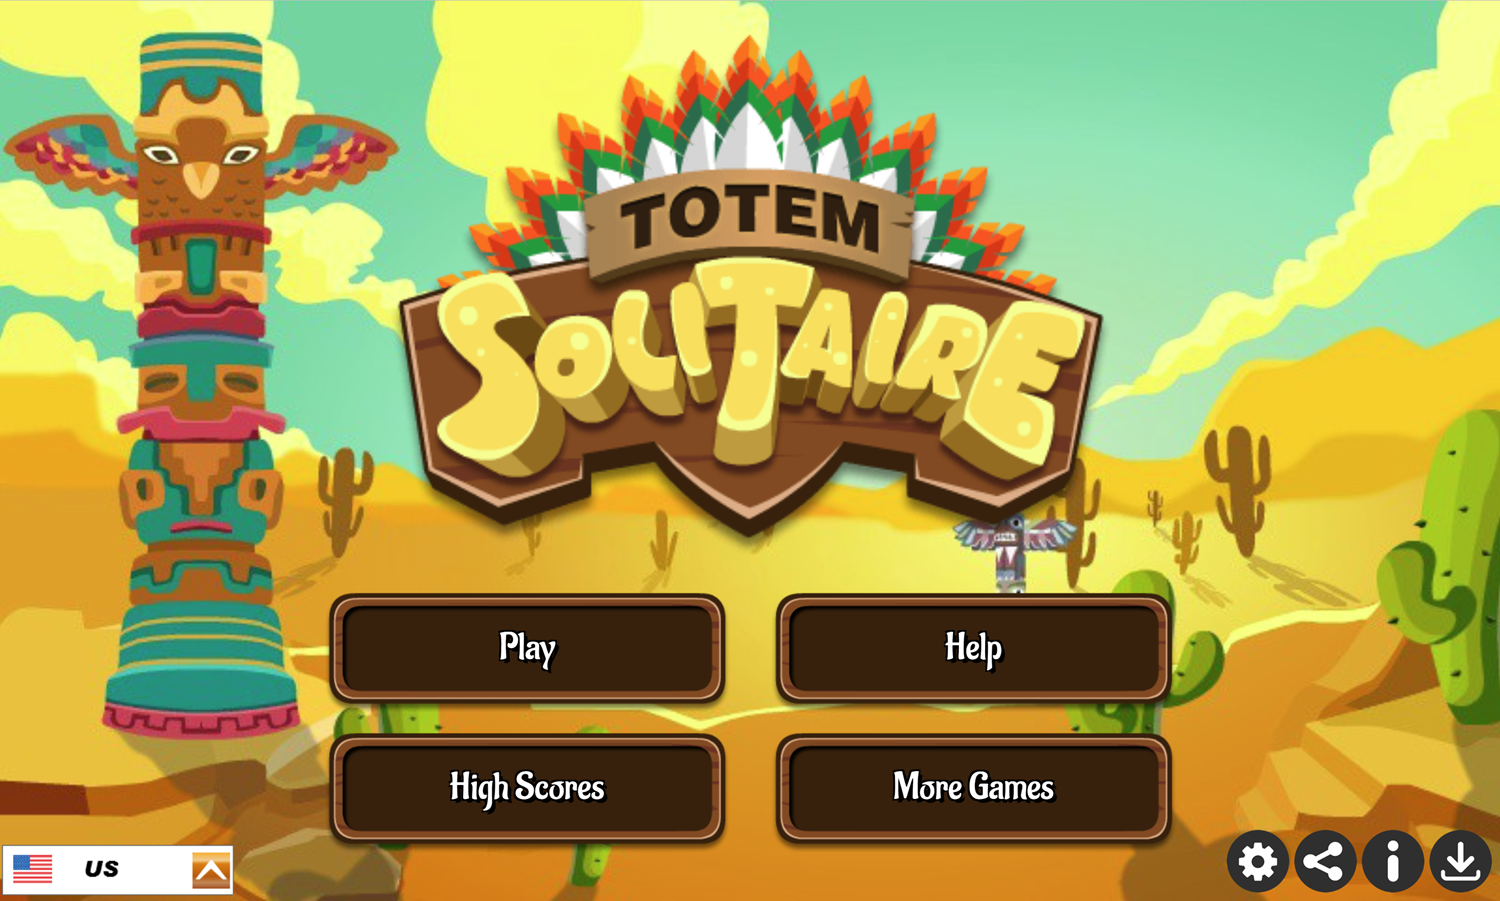 Totem Solitaire Game Welcome Screen Screenshot.